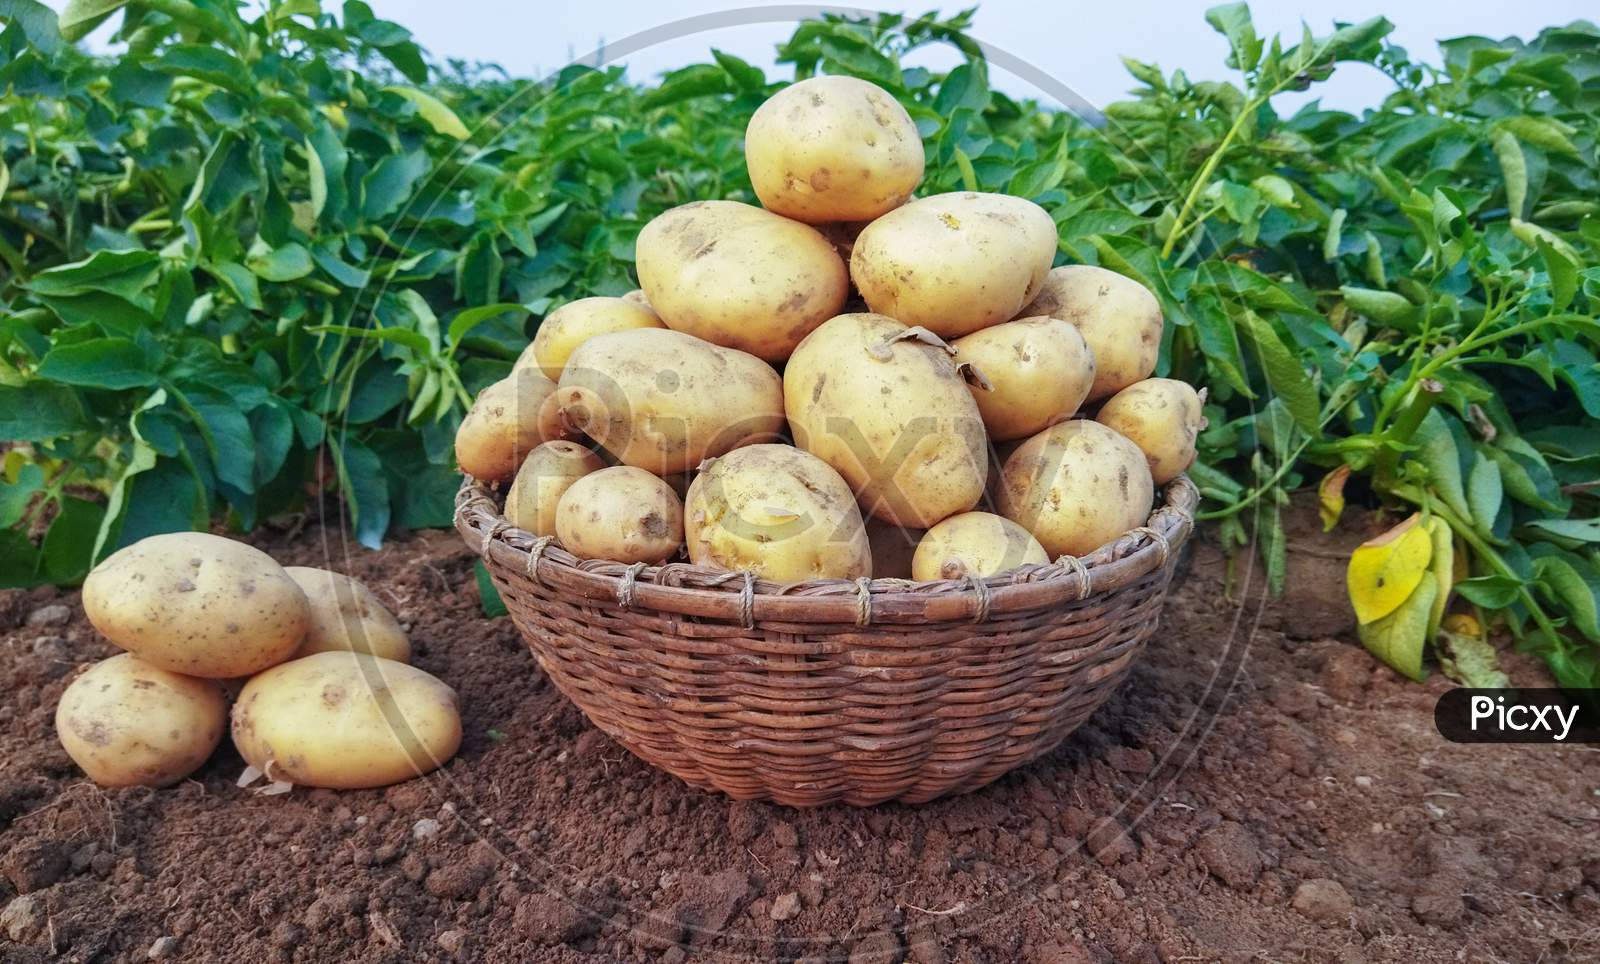 Fresh Potato In The Busket. Fresh Organic Potatoes In The Field, Harvesting Potatoes From Soil